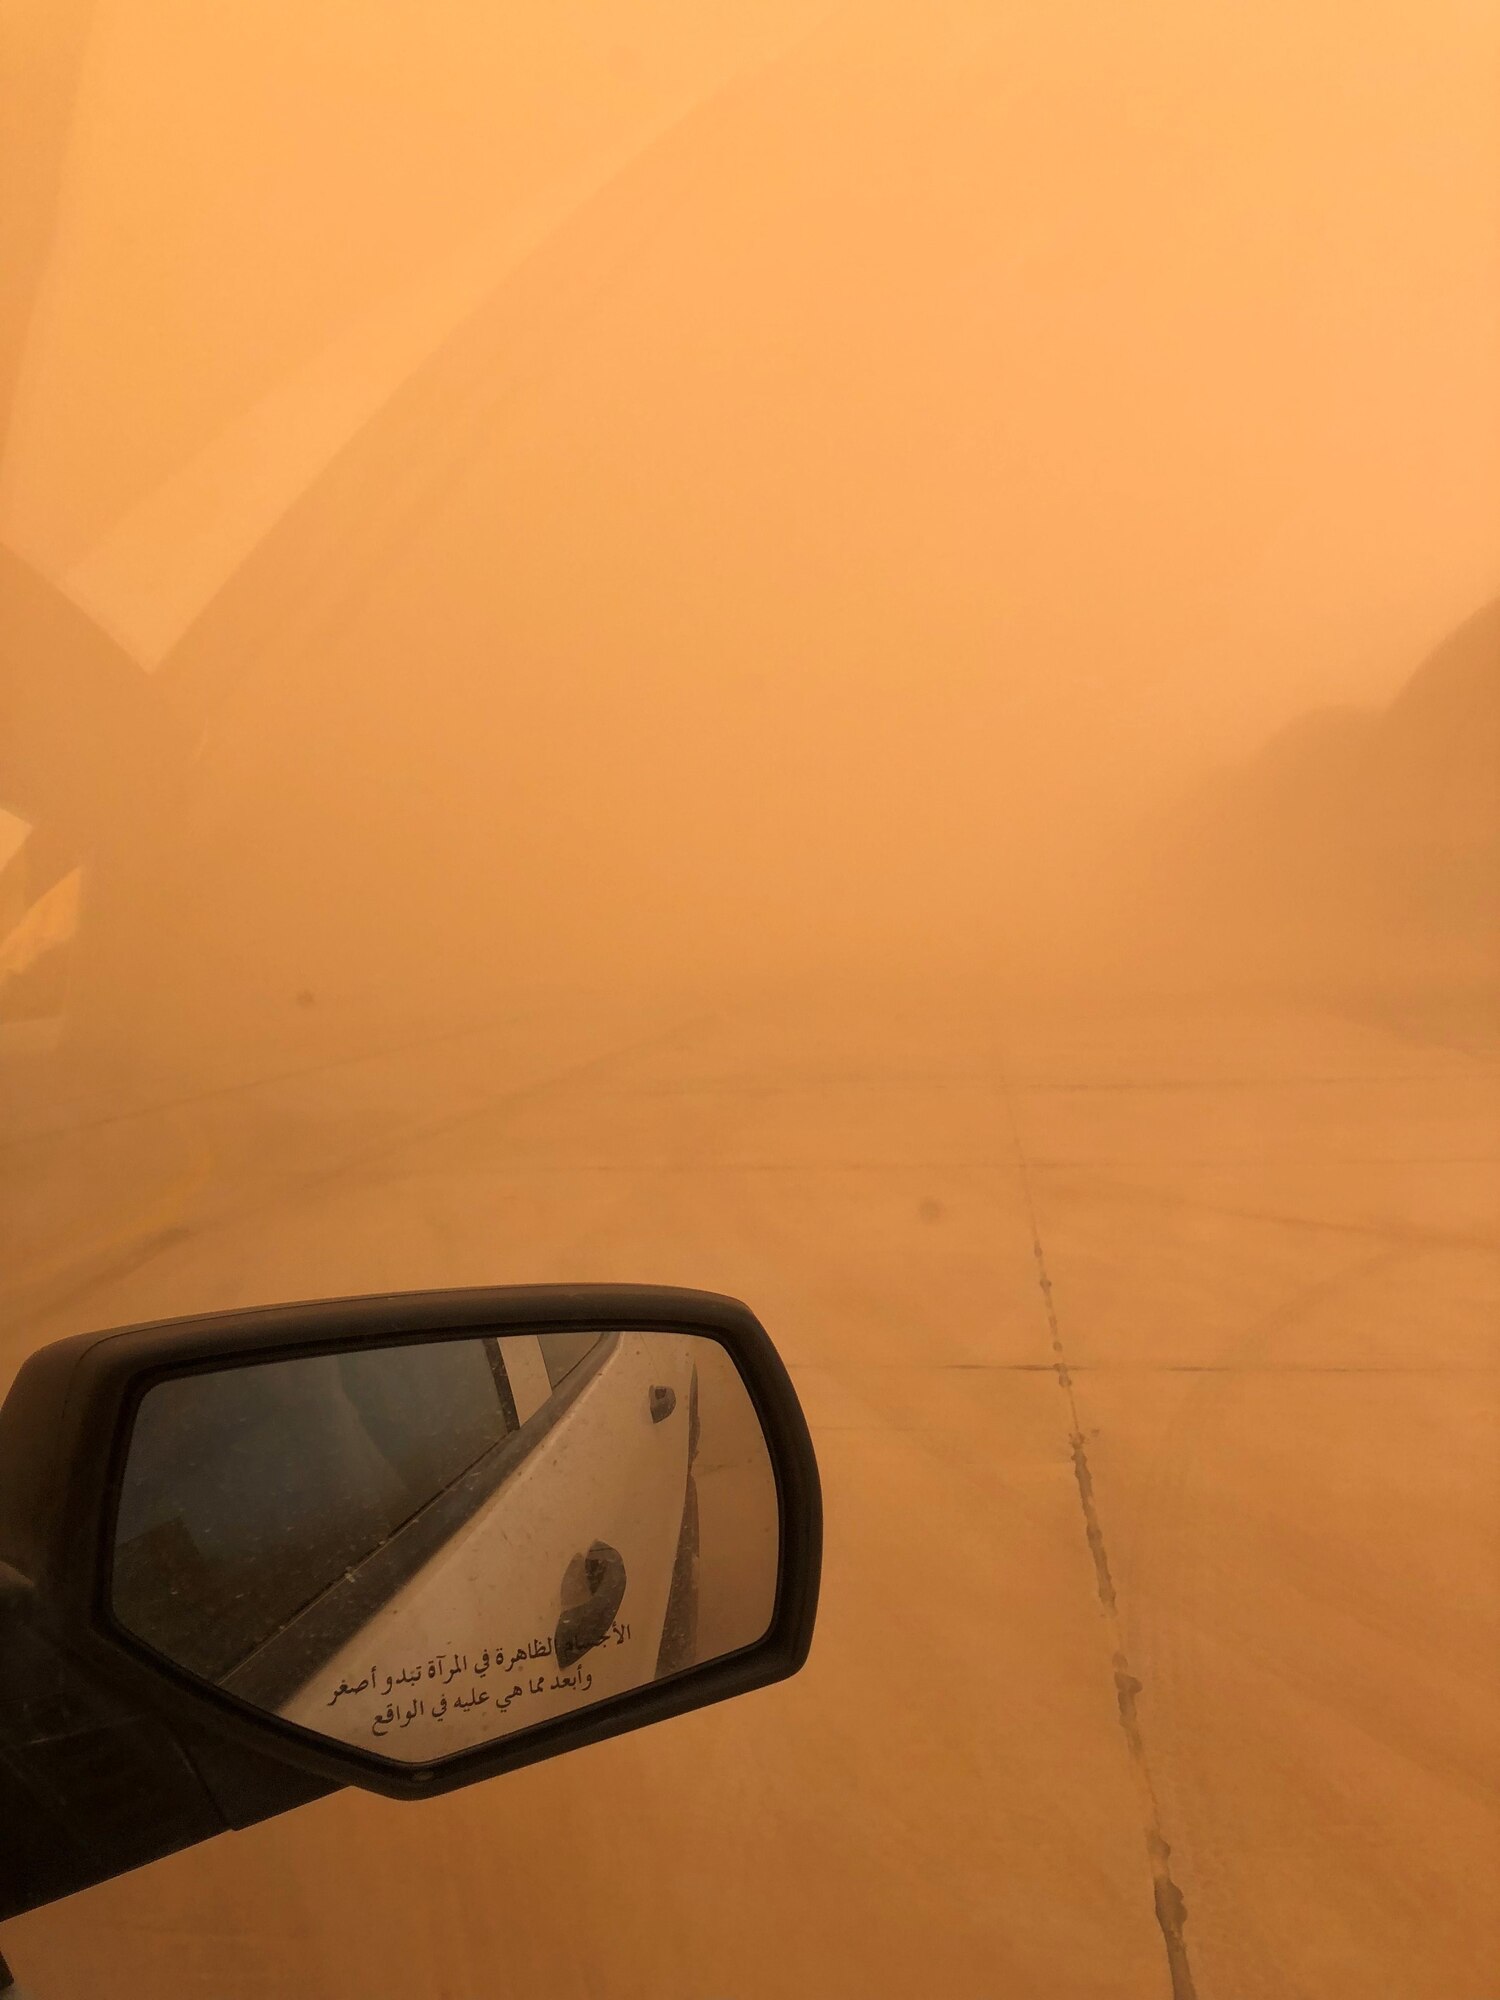 Air quality and visibility is diminished during a dust storm at the 407th Air Expeditionary Group, Ahmad al-Jaber Air Base, Kuwait in 2018. (Courtesy photo from Chief Master Sgt. Ryan Gigliotti)